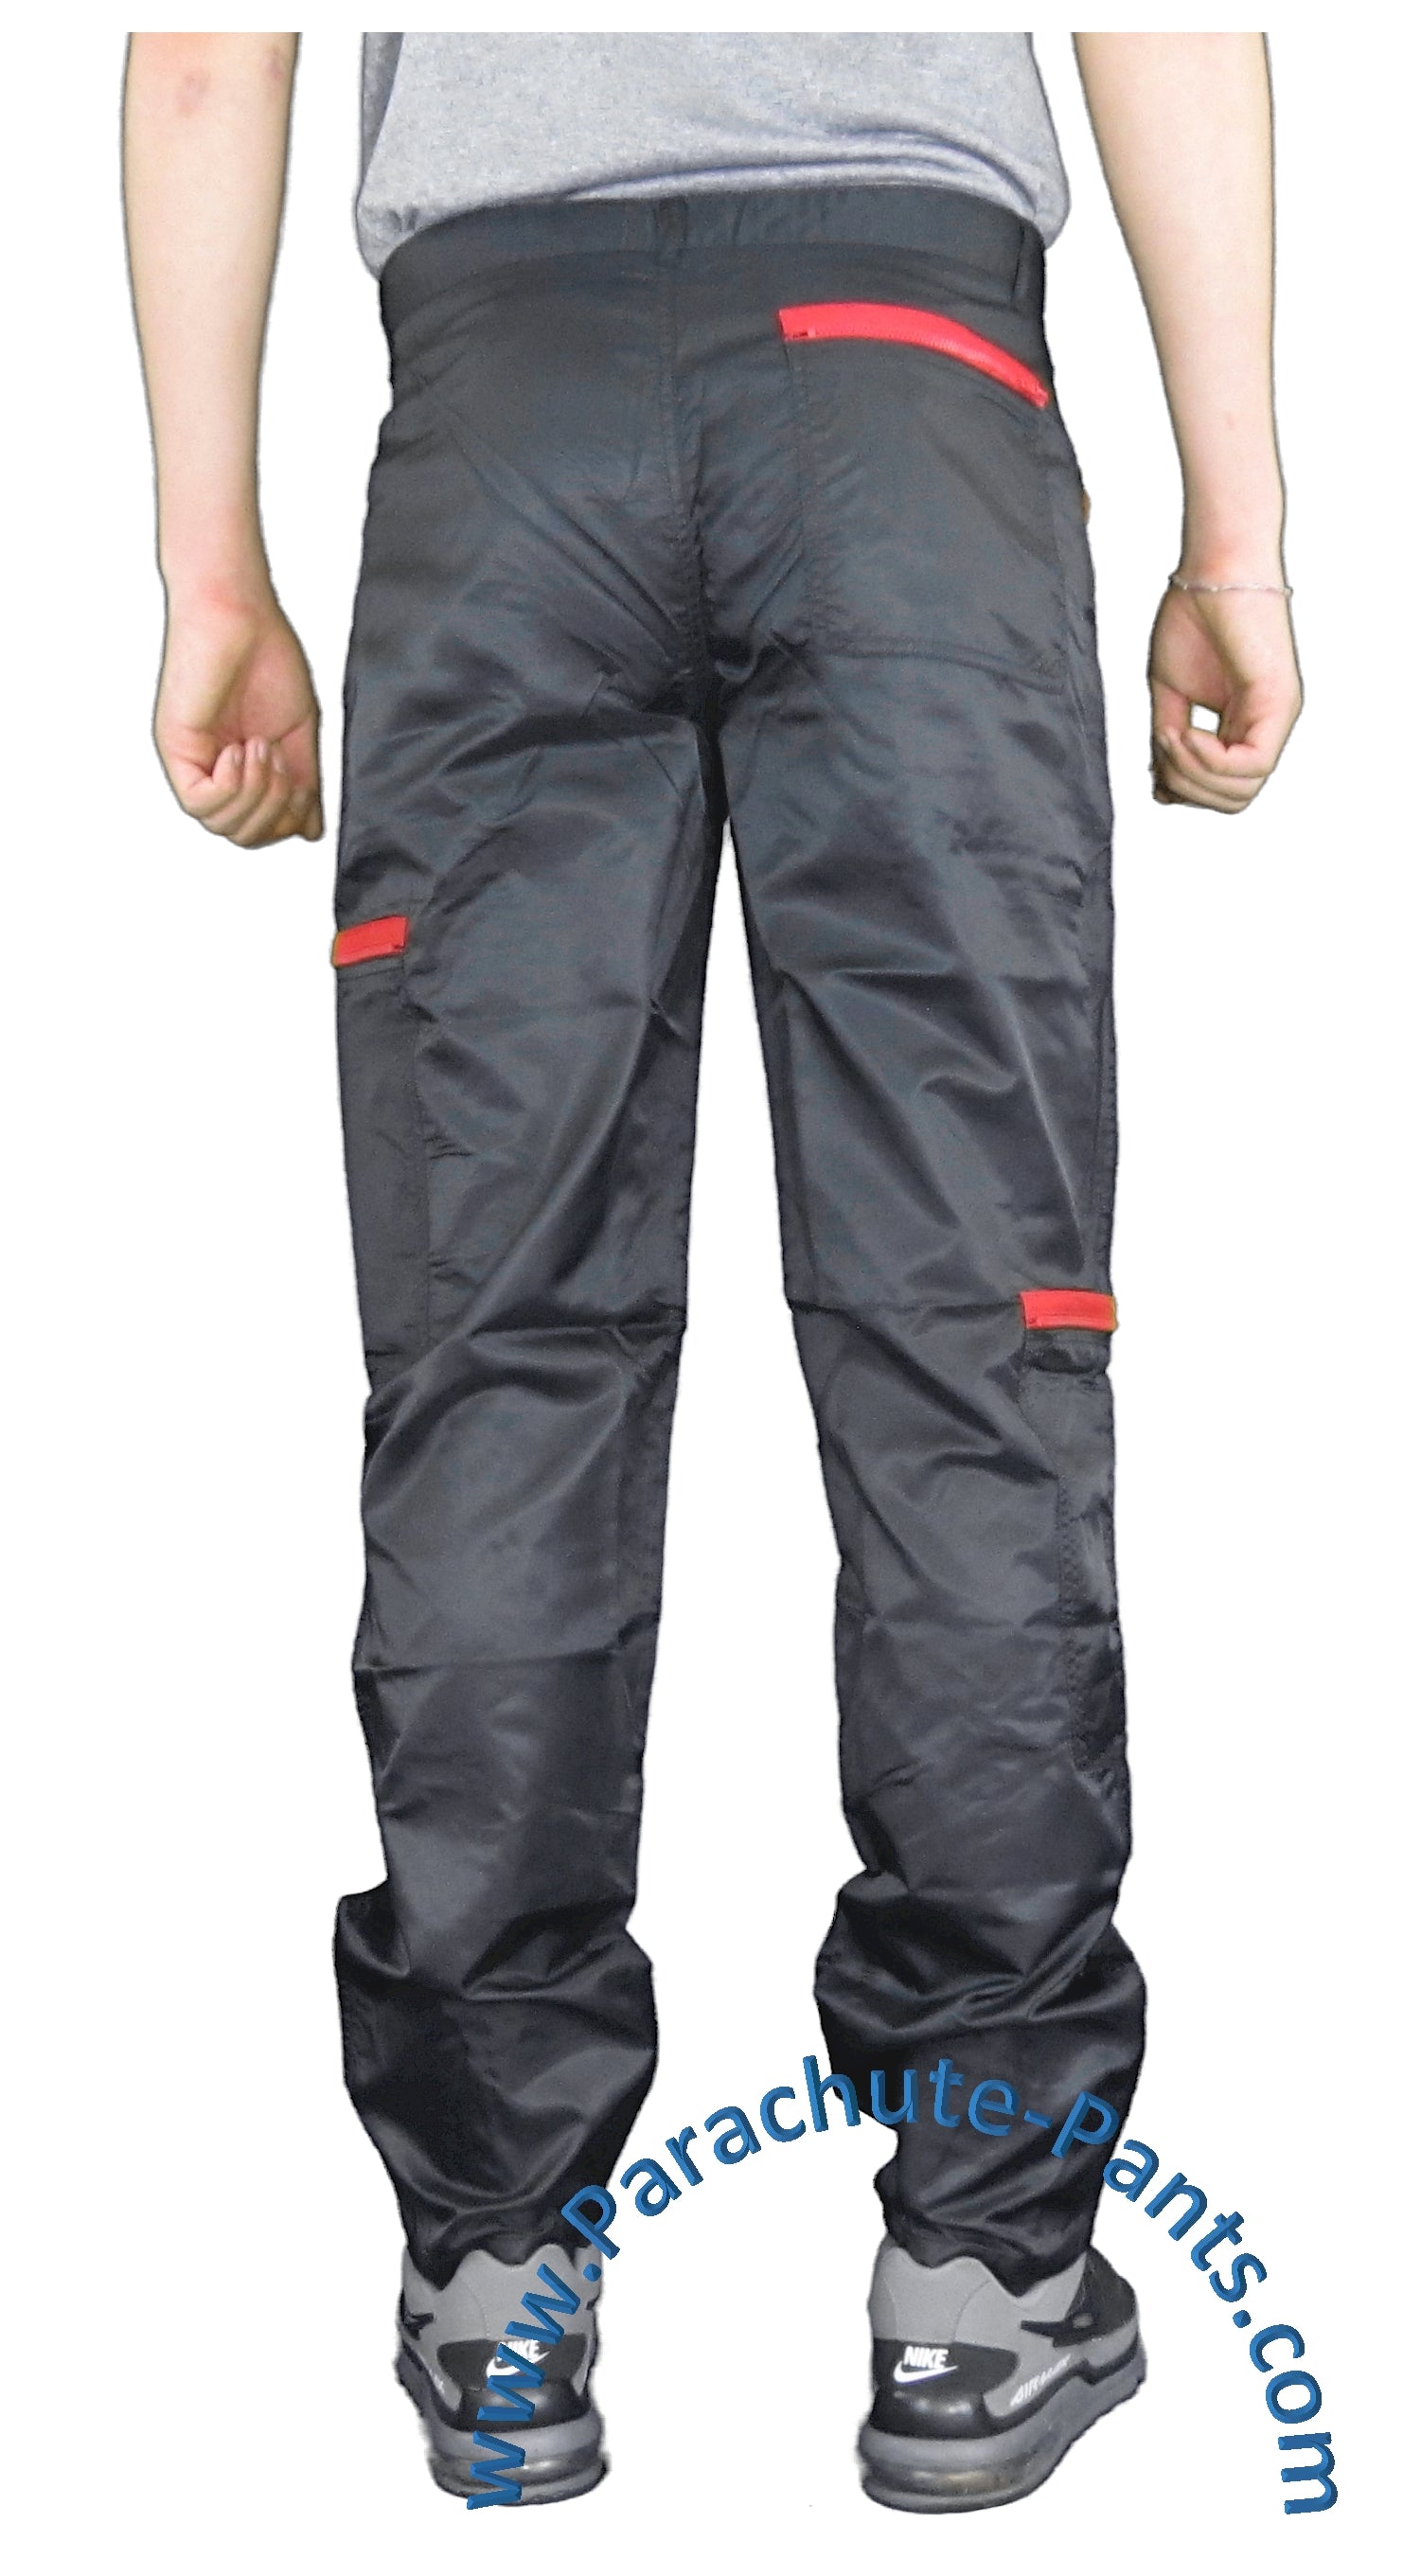 Countdown Black Classic Nylon Parachute Pants with Red Zippers | The ...